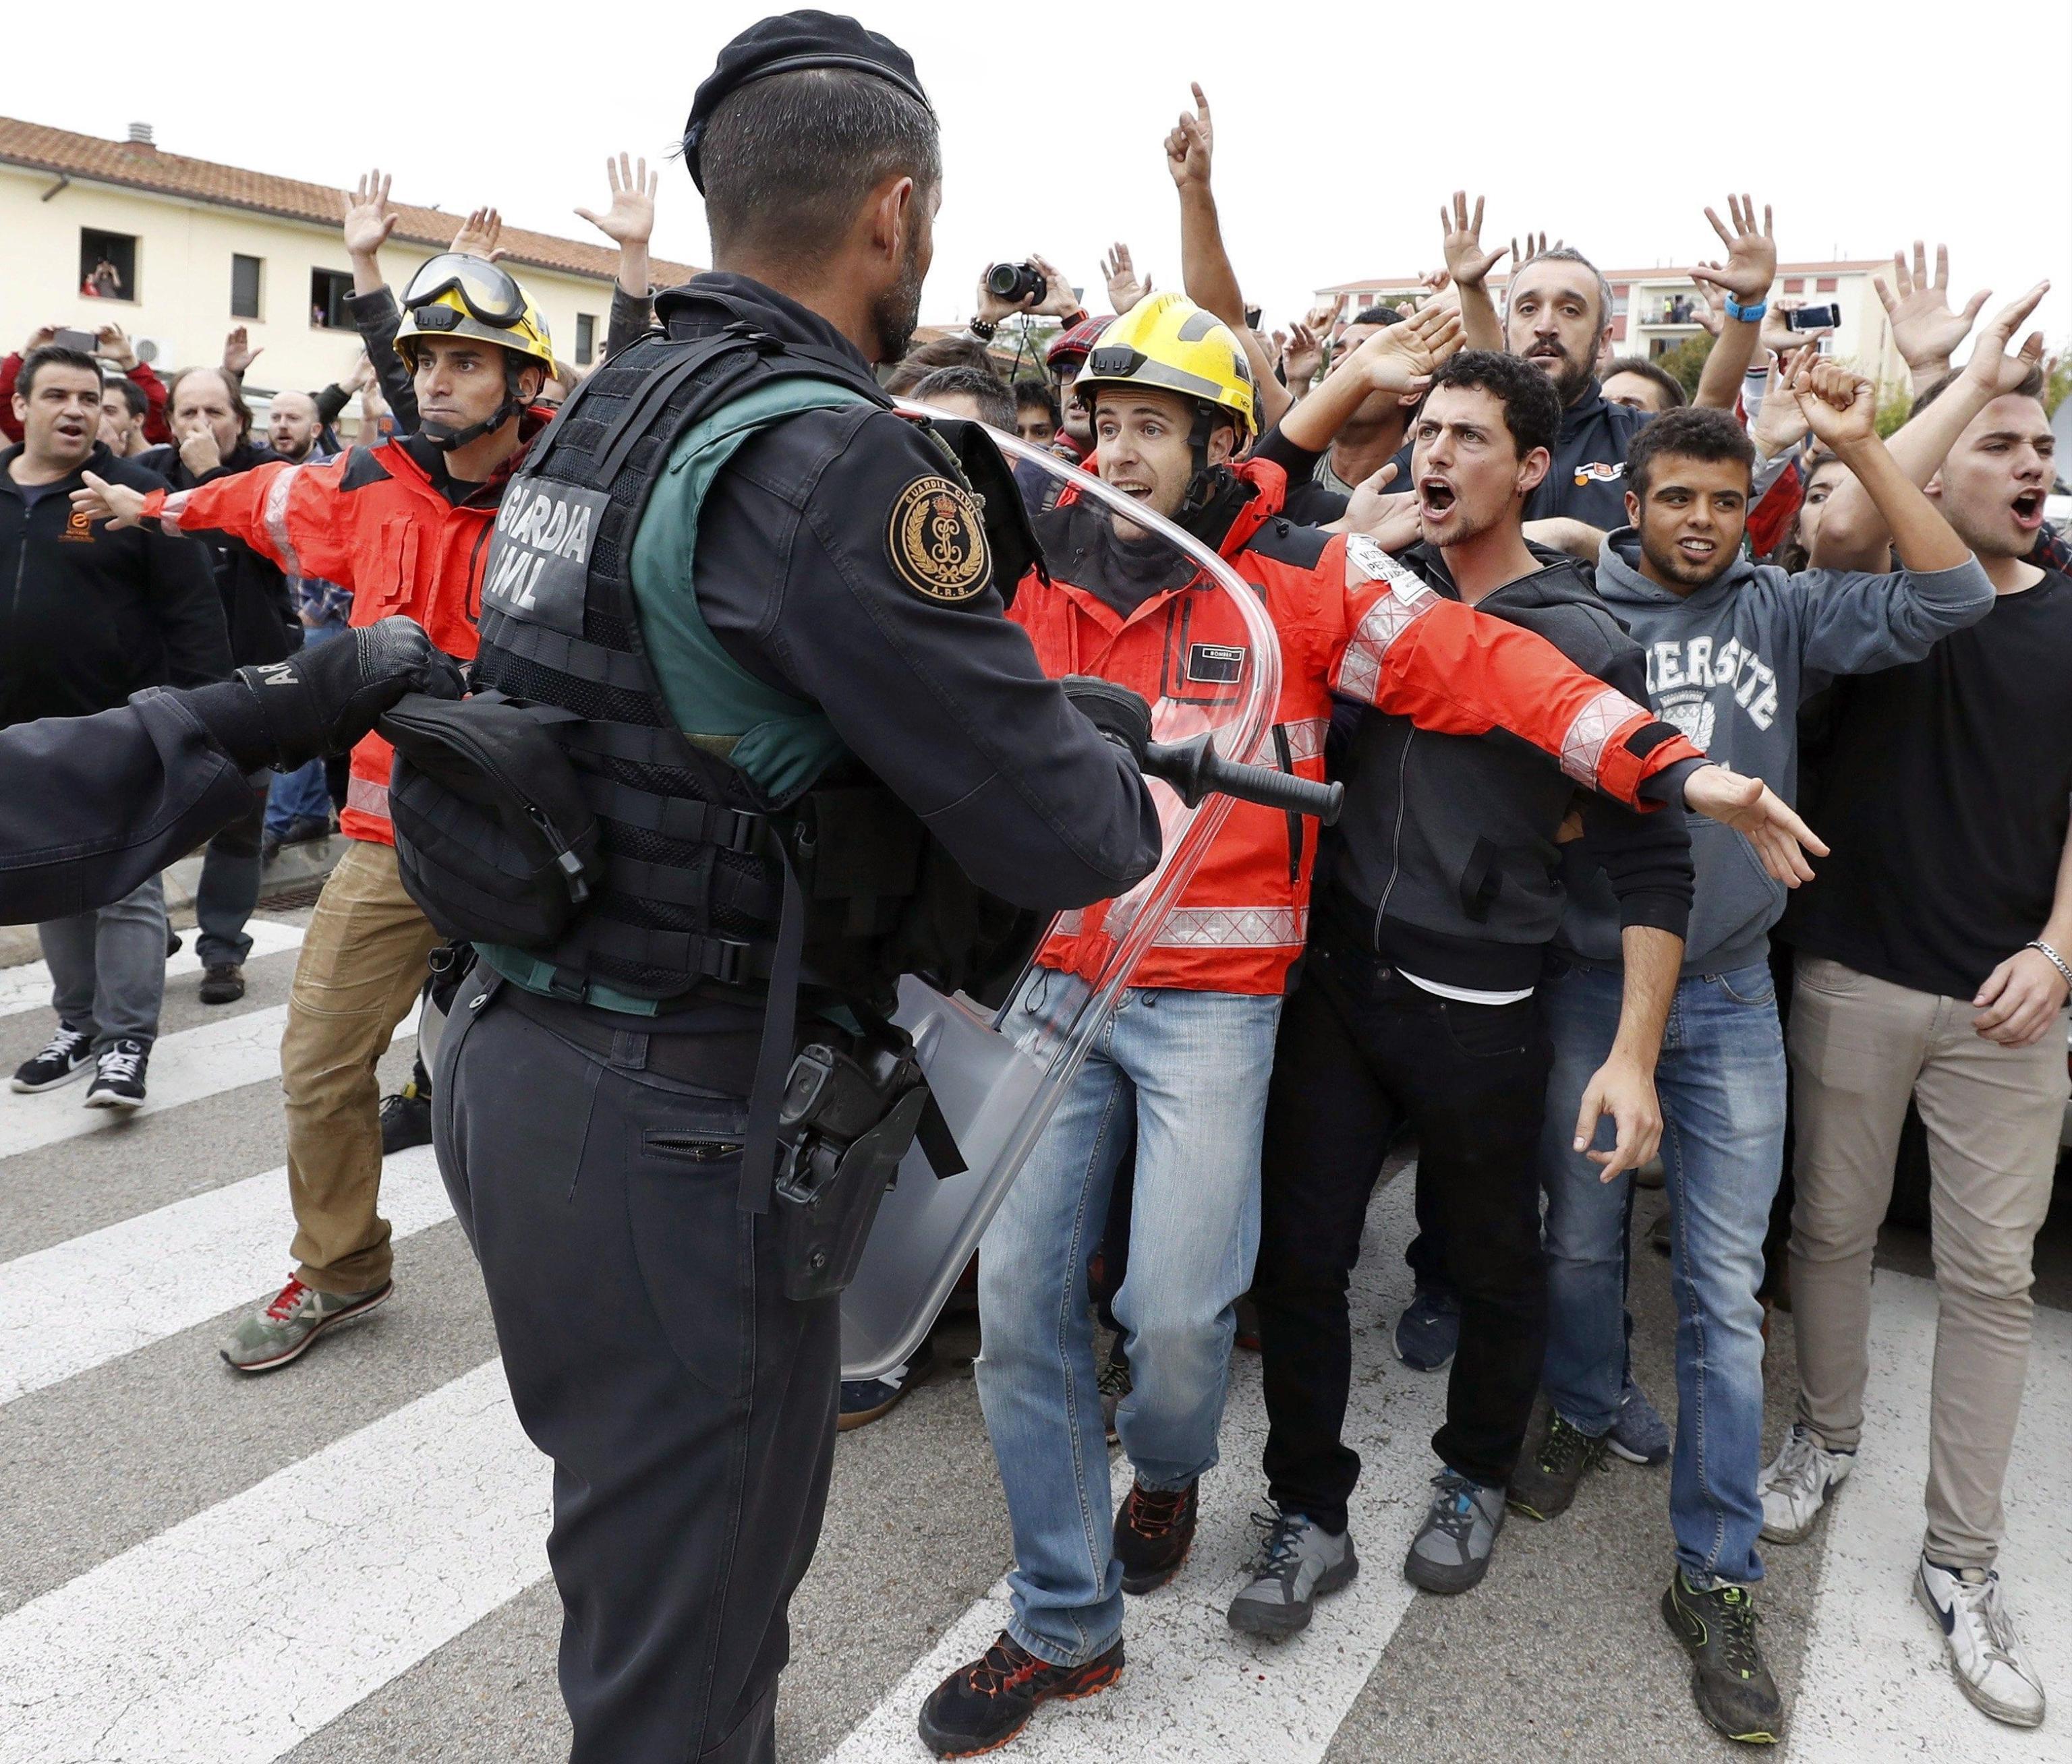 Firemen try to hold back Catalan pro-independence people as clashes take place with Spanish Civil guards at a polling center at Sant Julia de Ramis sports center in Girona, where the Catalan President, Carles Puigdemont, was initially to vote, in Girona, Catalonia, northeastern Spain, on 01 October 2017. Spanish National Police officers and Civil guards have been deployed to prevent the people from entering to the polling centers to vote in the Catalan independence referendum, that has been banned by the Spanish Constitutional Court, but many people have managed to do it. The police action has provocked clashes between pro-independence people and the police forces in some polling centers. EFE/Andreu Dalmau  EPA/Andreu Dalmau